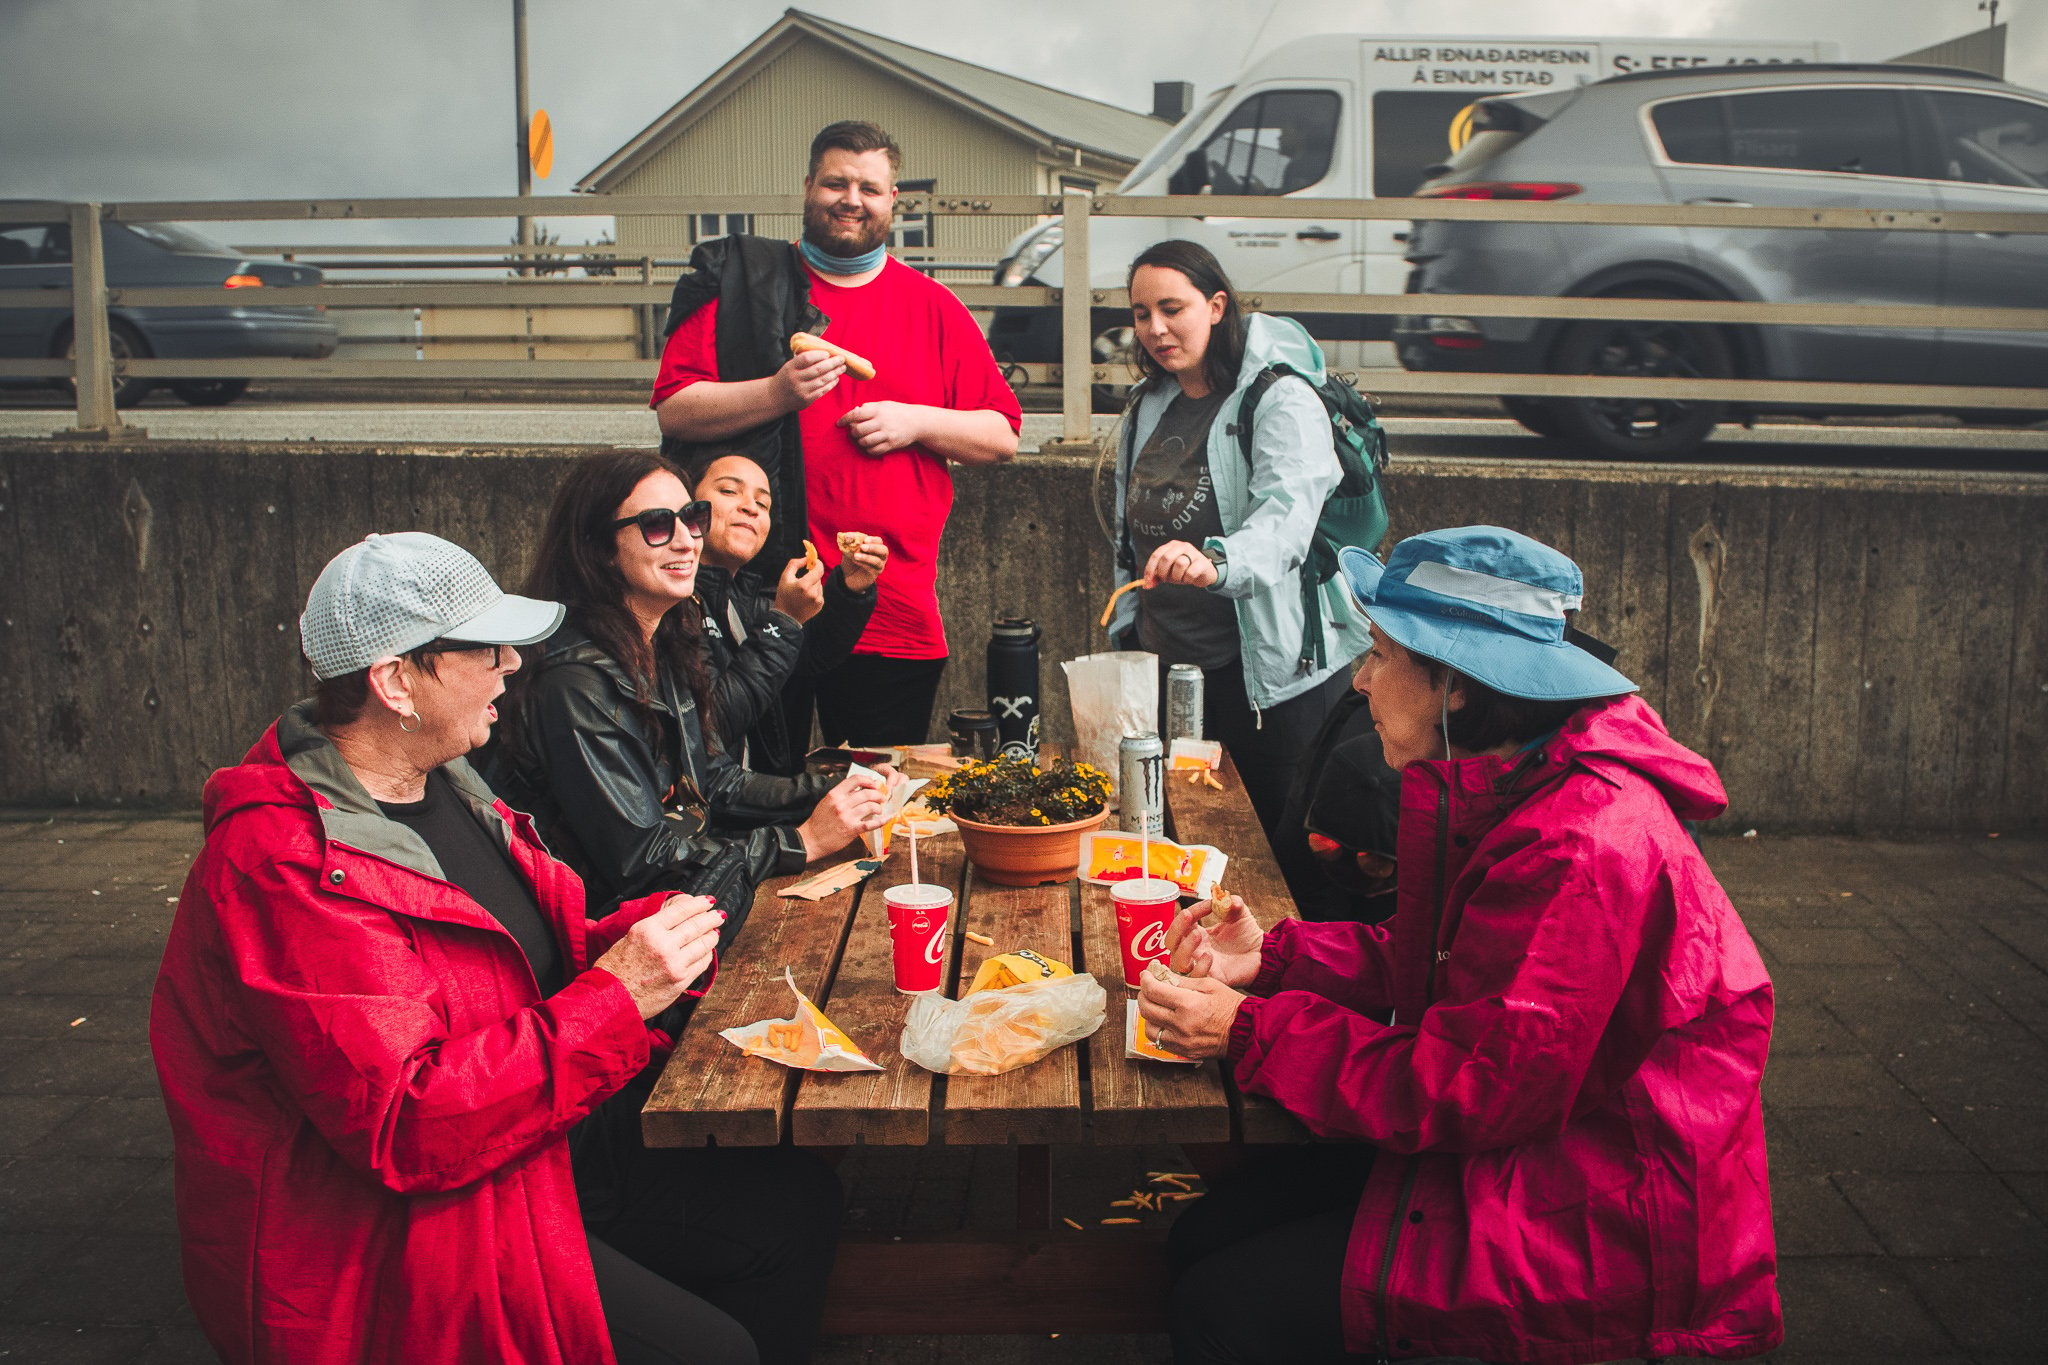 Group eating in Iceland.